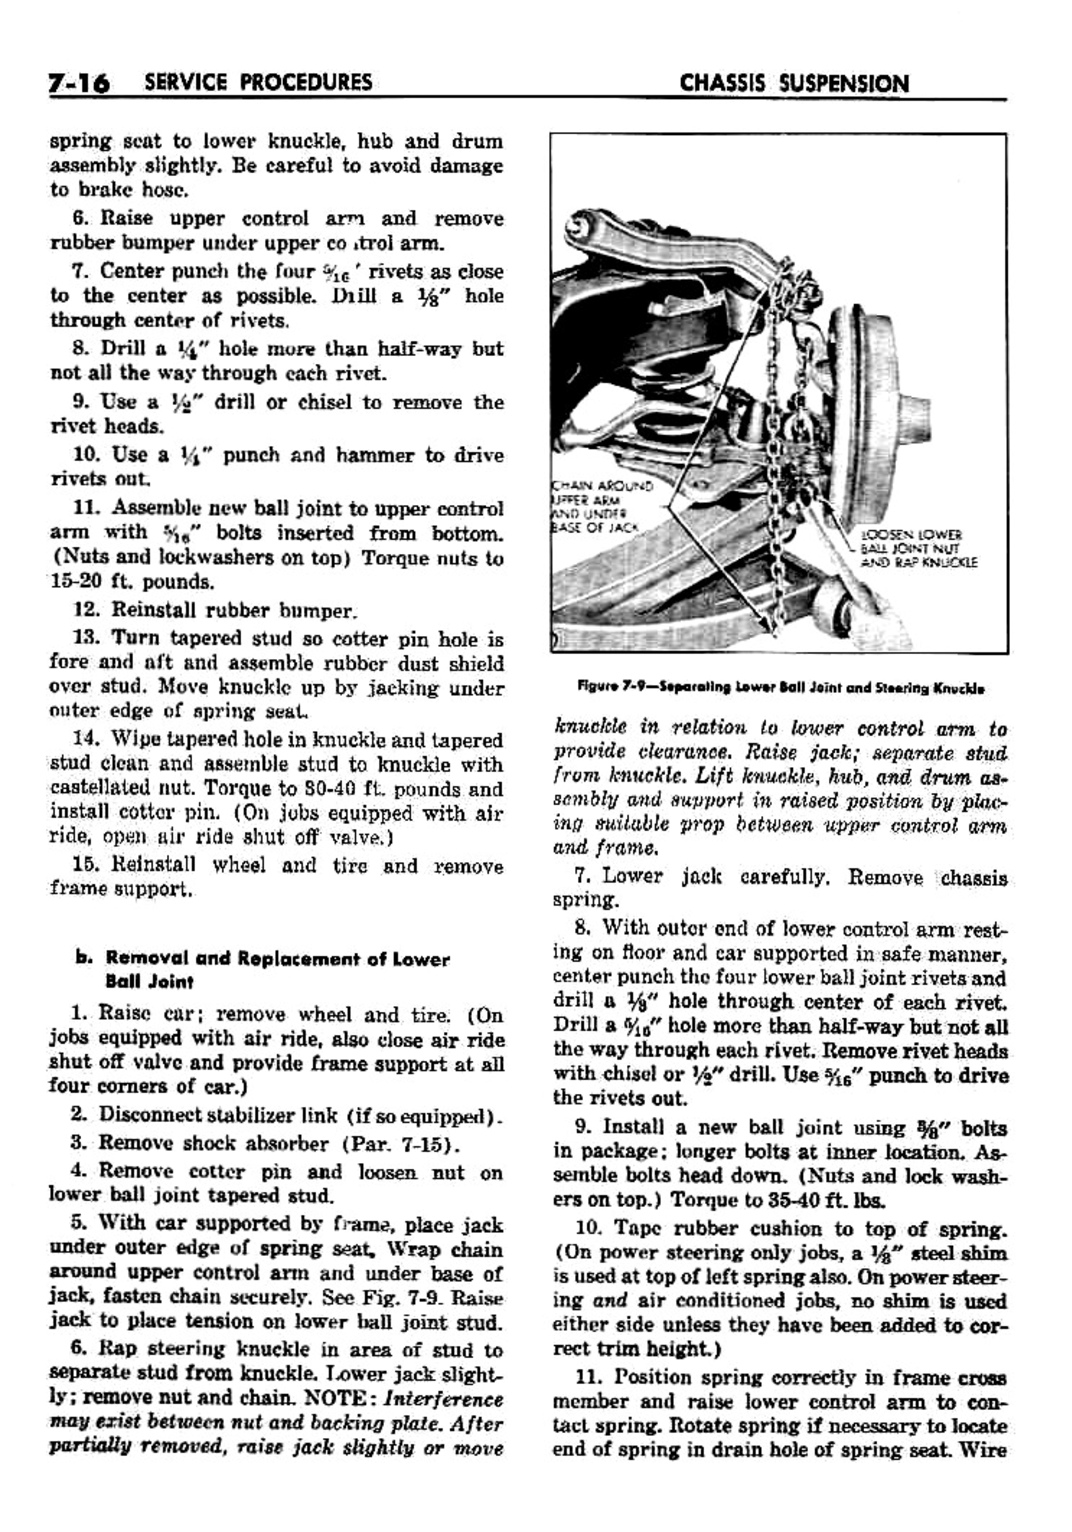 n_08 1959 Buick Shop Manual - Chassis Suspension-016-016.jpg